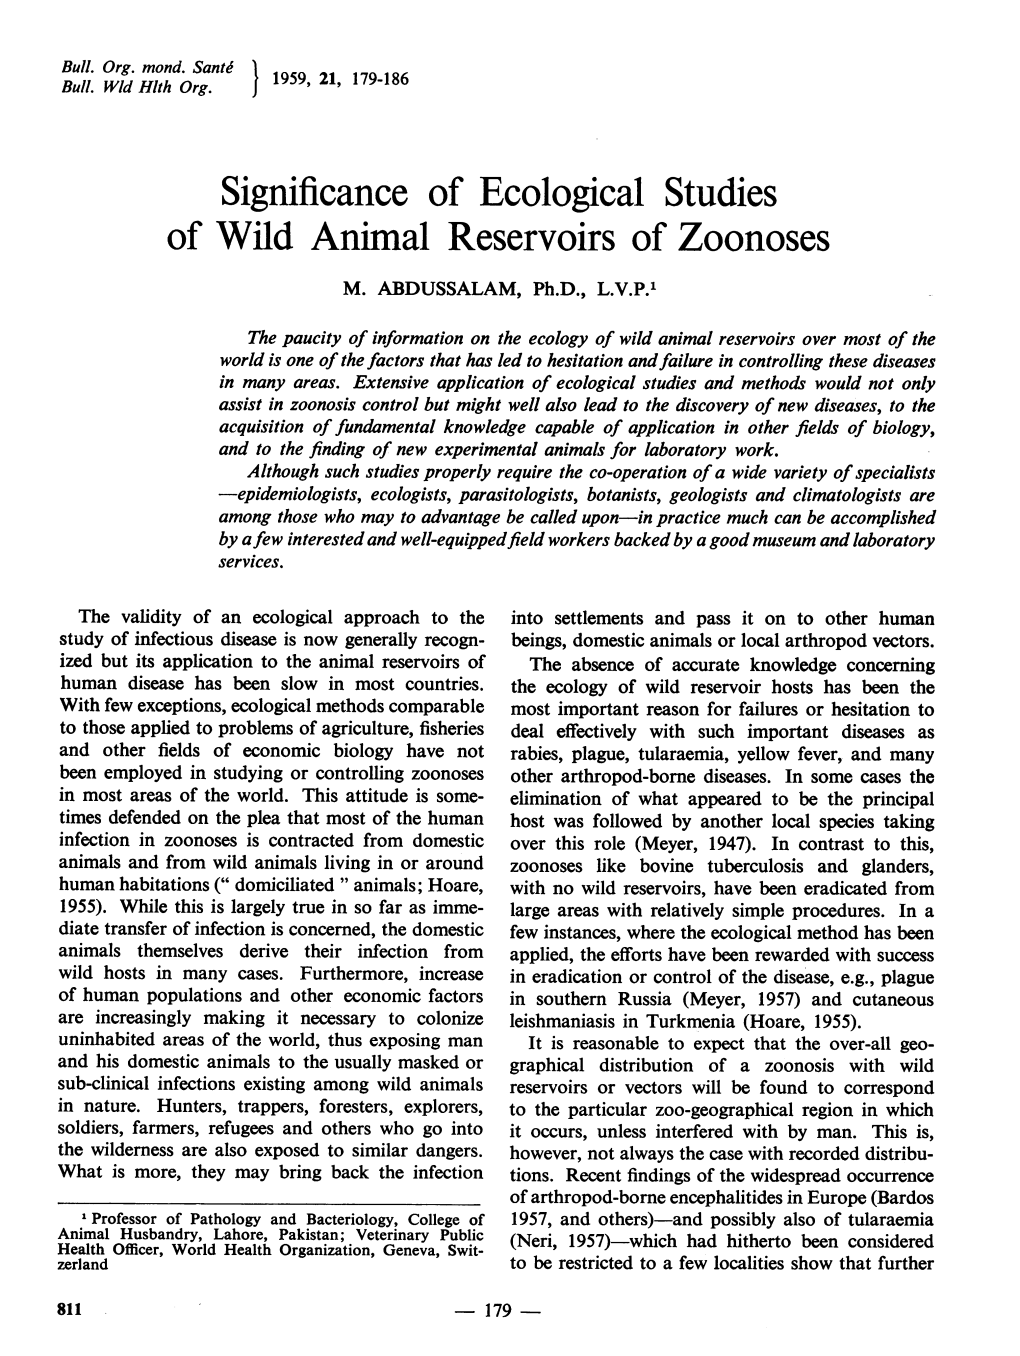 Significance of Ecological Studies of Wild Animal Reservoirs of Zoonoses M